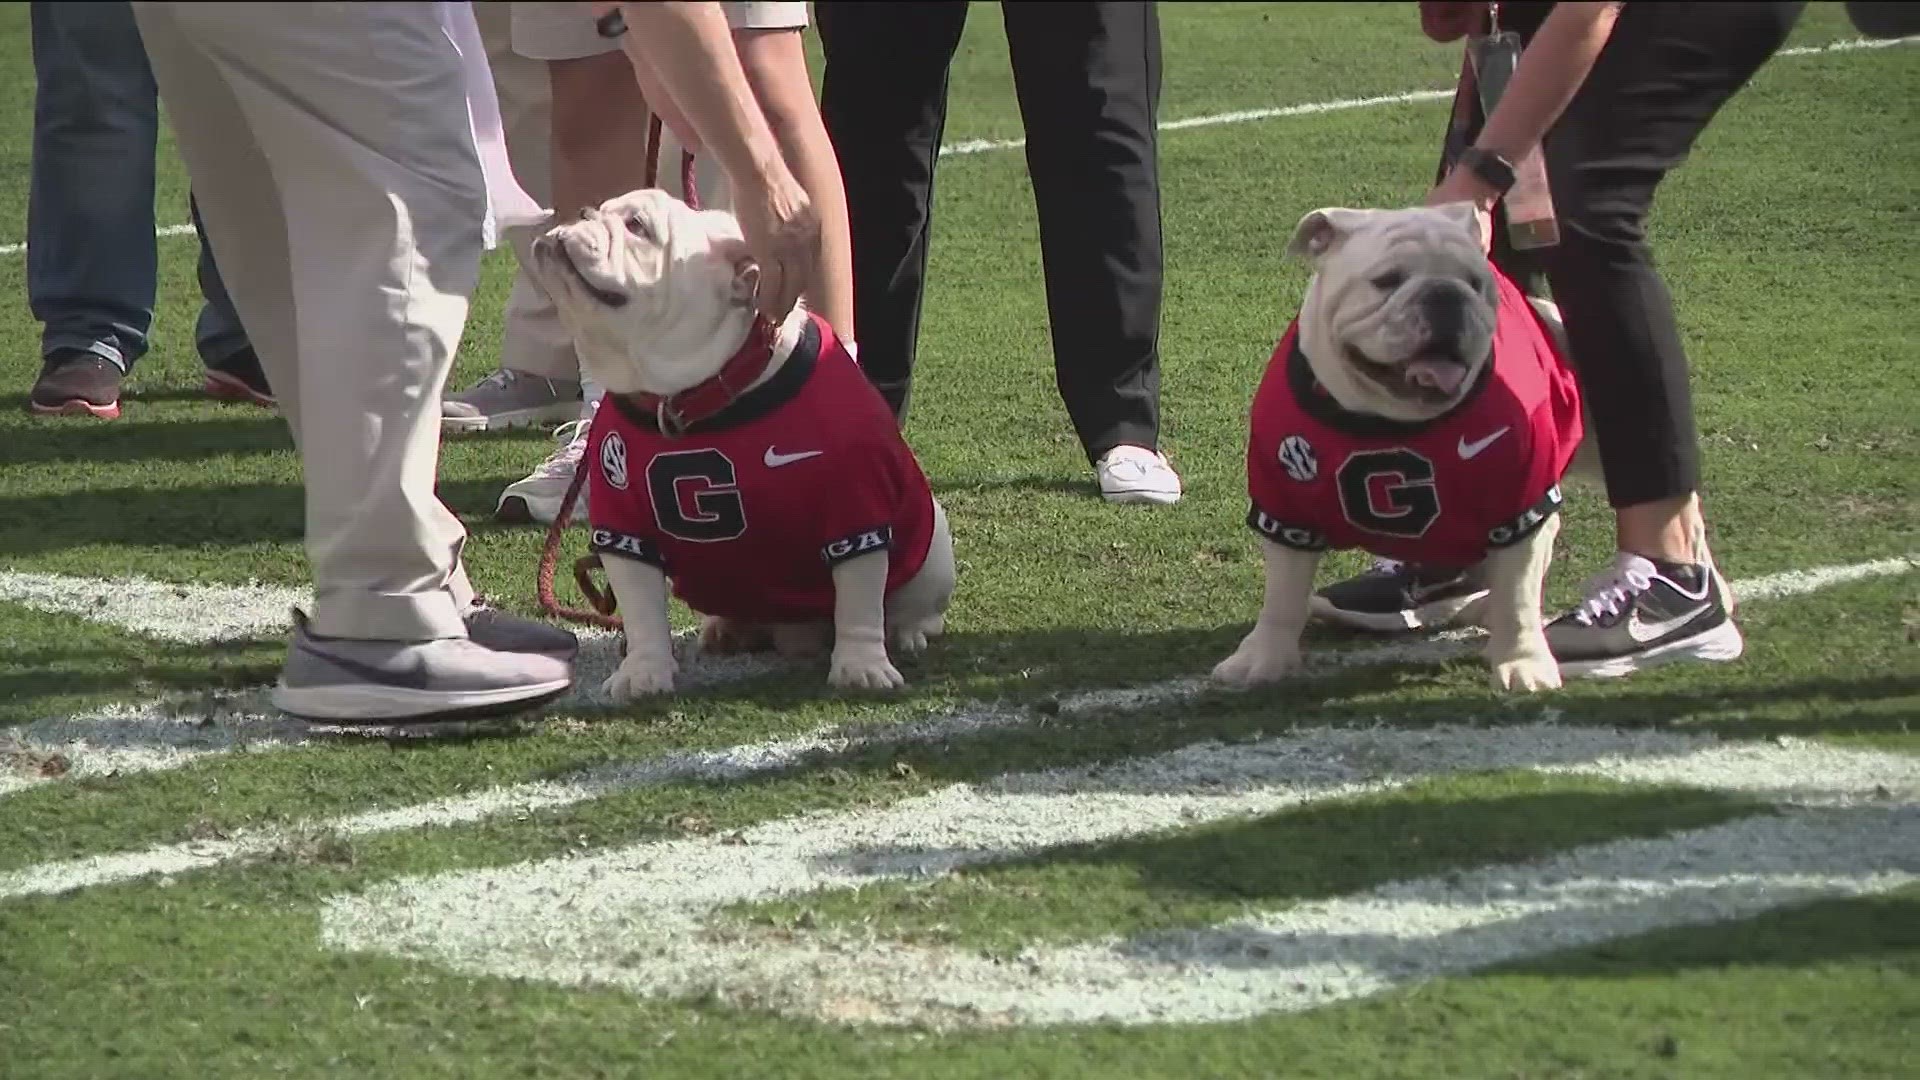 UGA introduces new mascot Boom and retires beloved Que